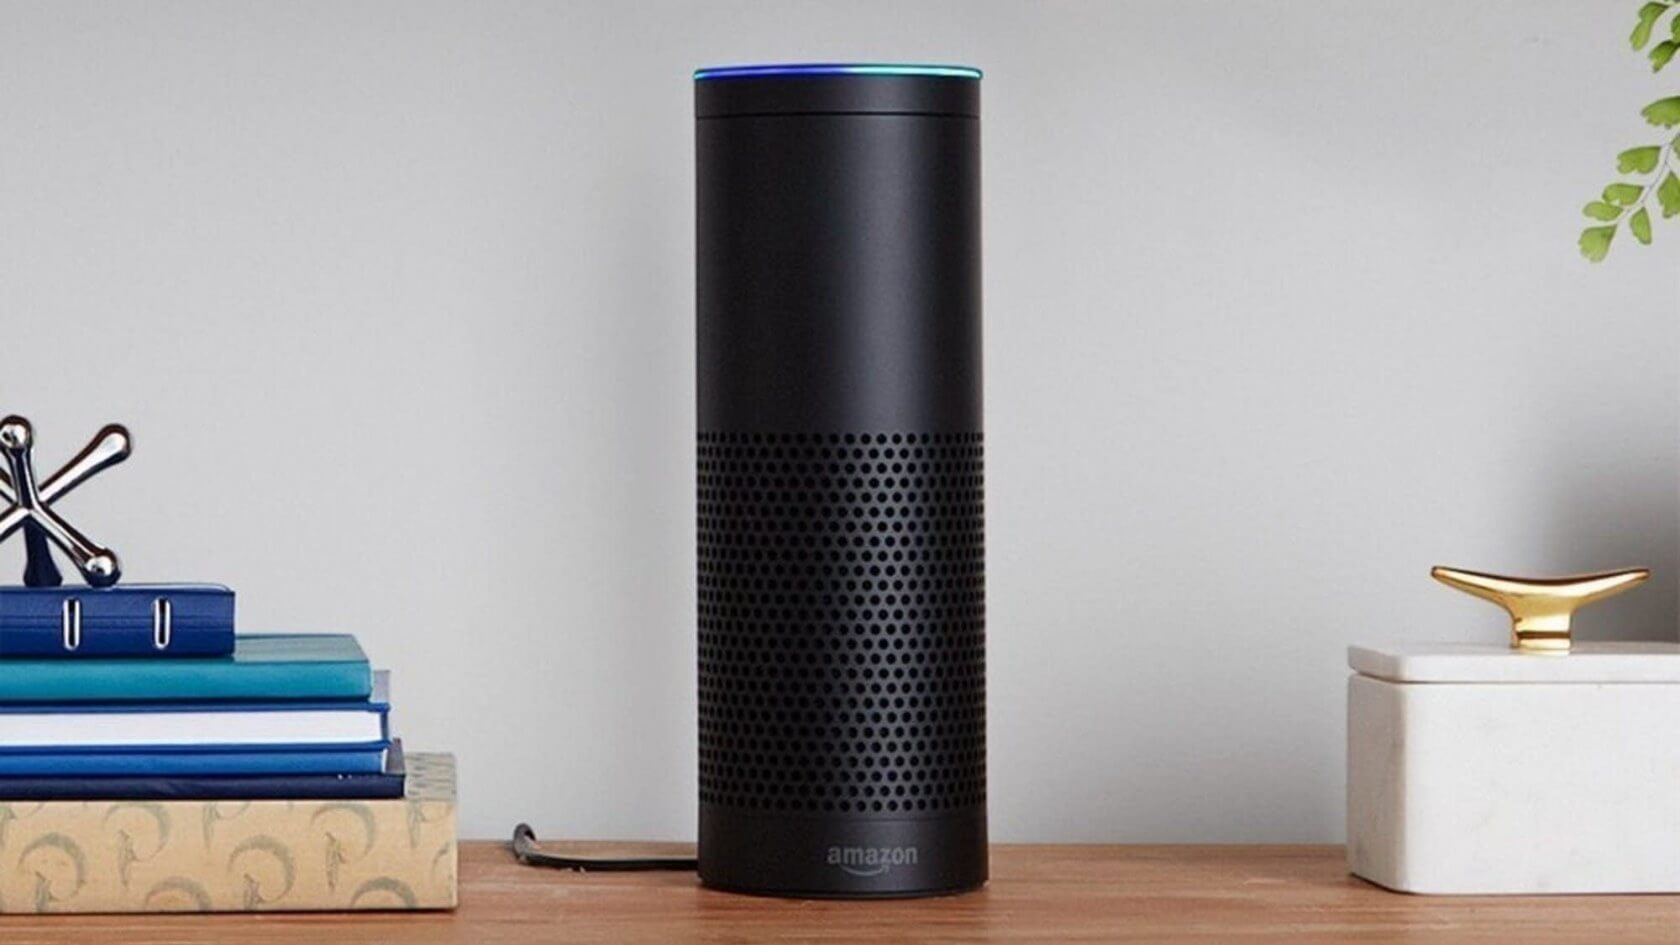 Amazon's Echo 'Song ID' feature tells you the name of songs before they play